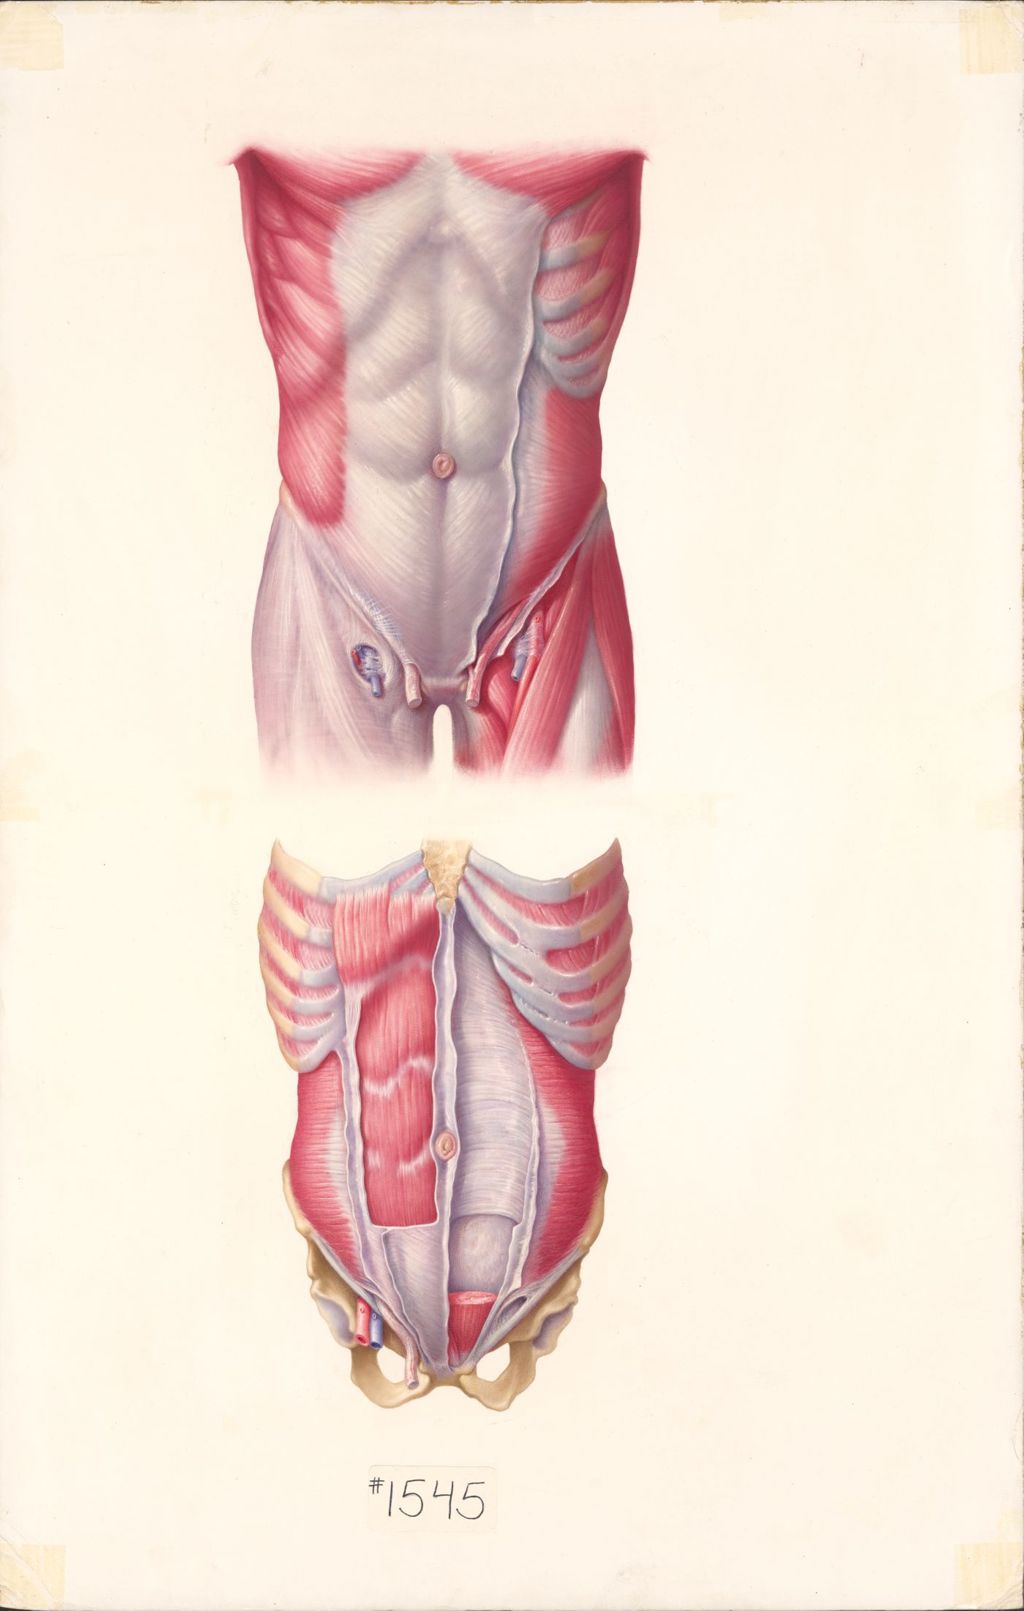 Miniature of Medical Profiles, The Anatomical Disposition of the Peritoneum, Anterior Abdominal Wall, Plate I, The Musculature of Anterior Abdominal Wall